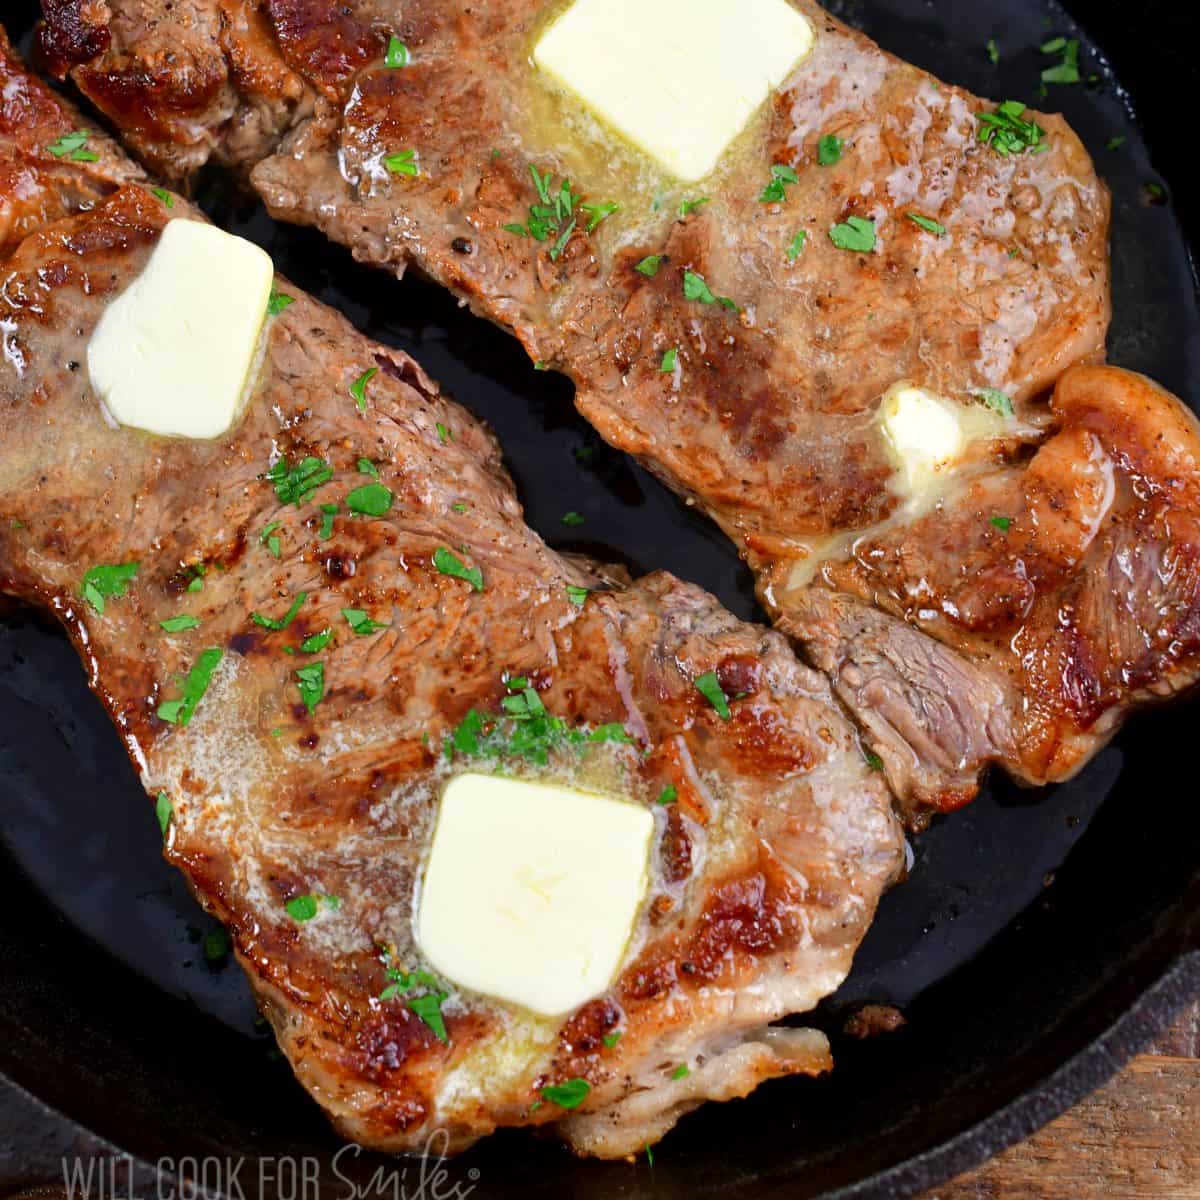 Pan Fried Steak Recipe and Nutrition - Eat This Much